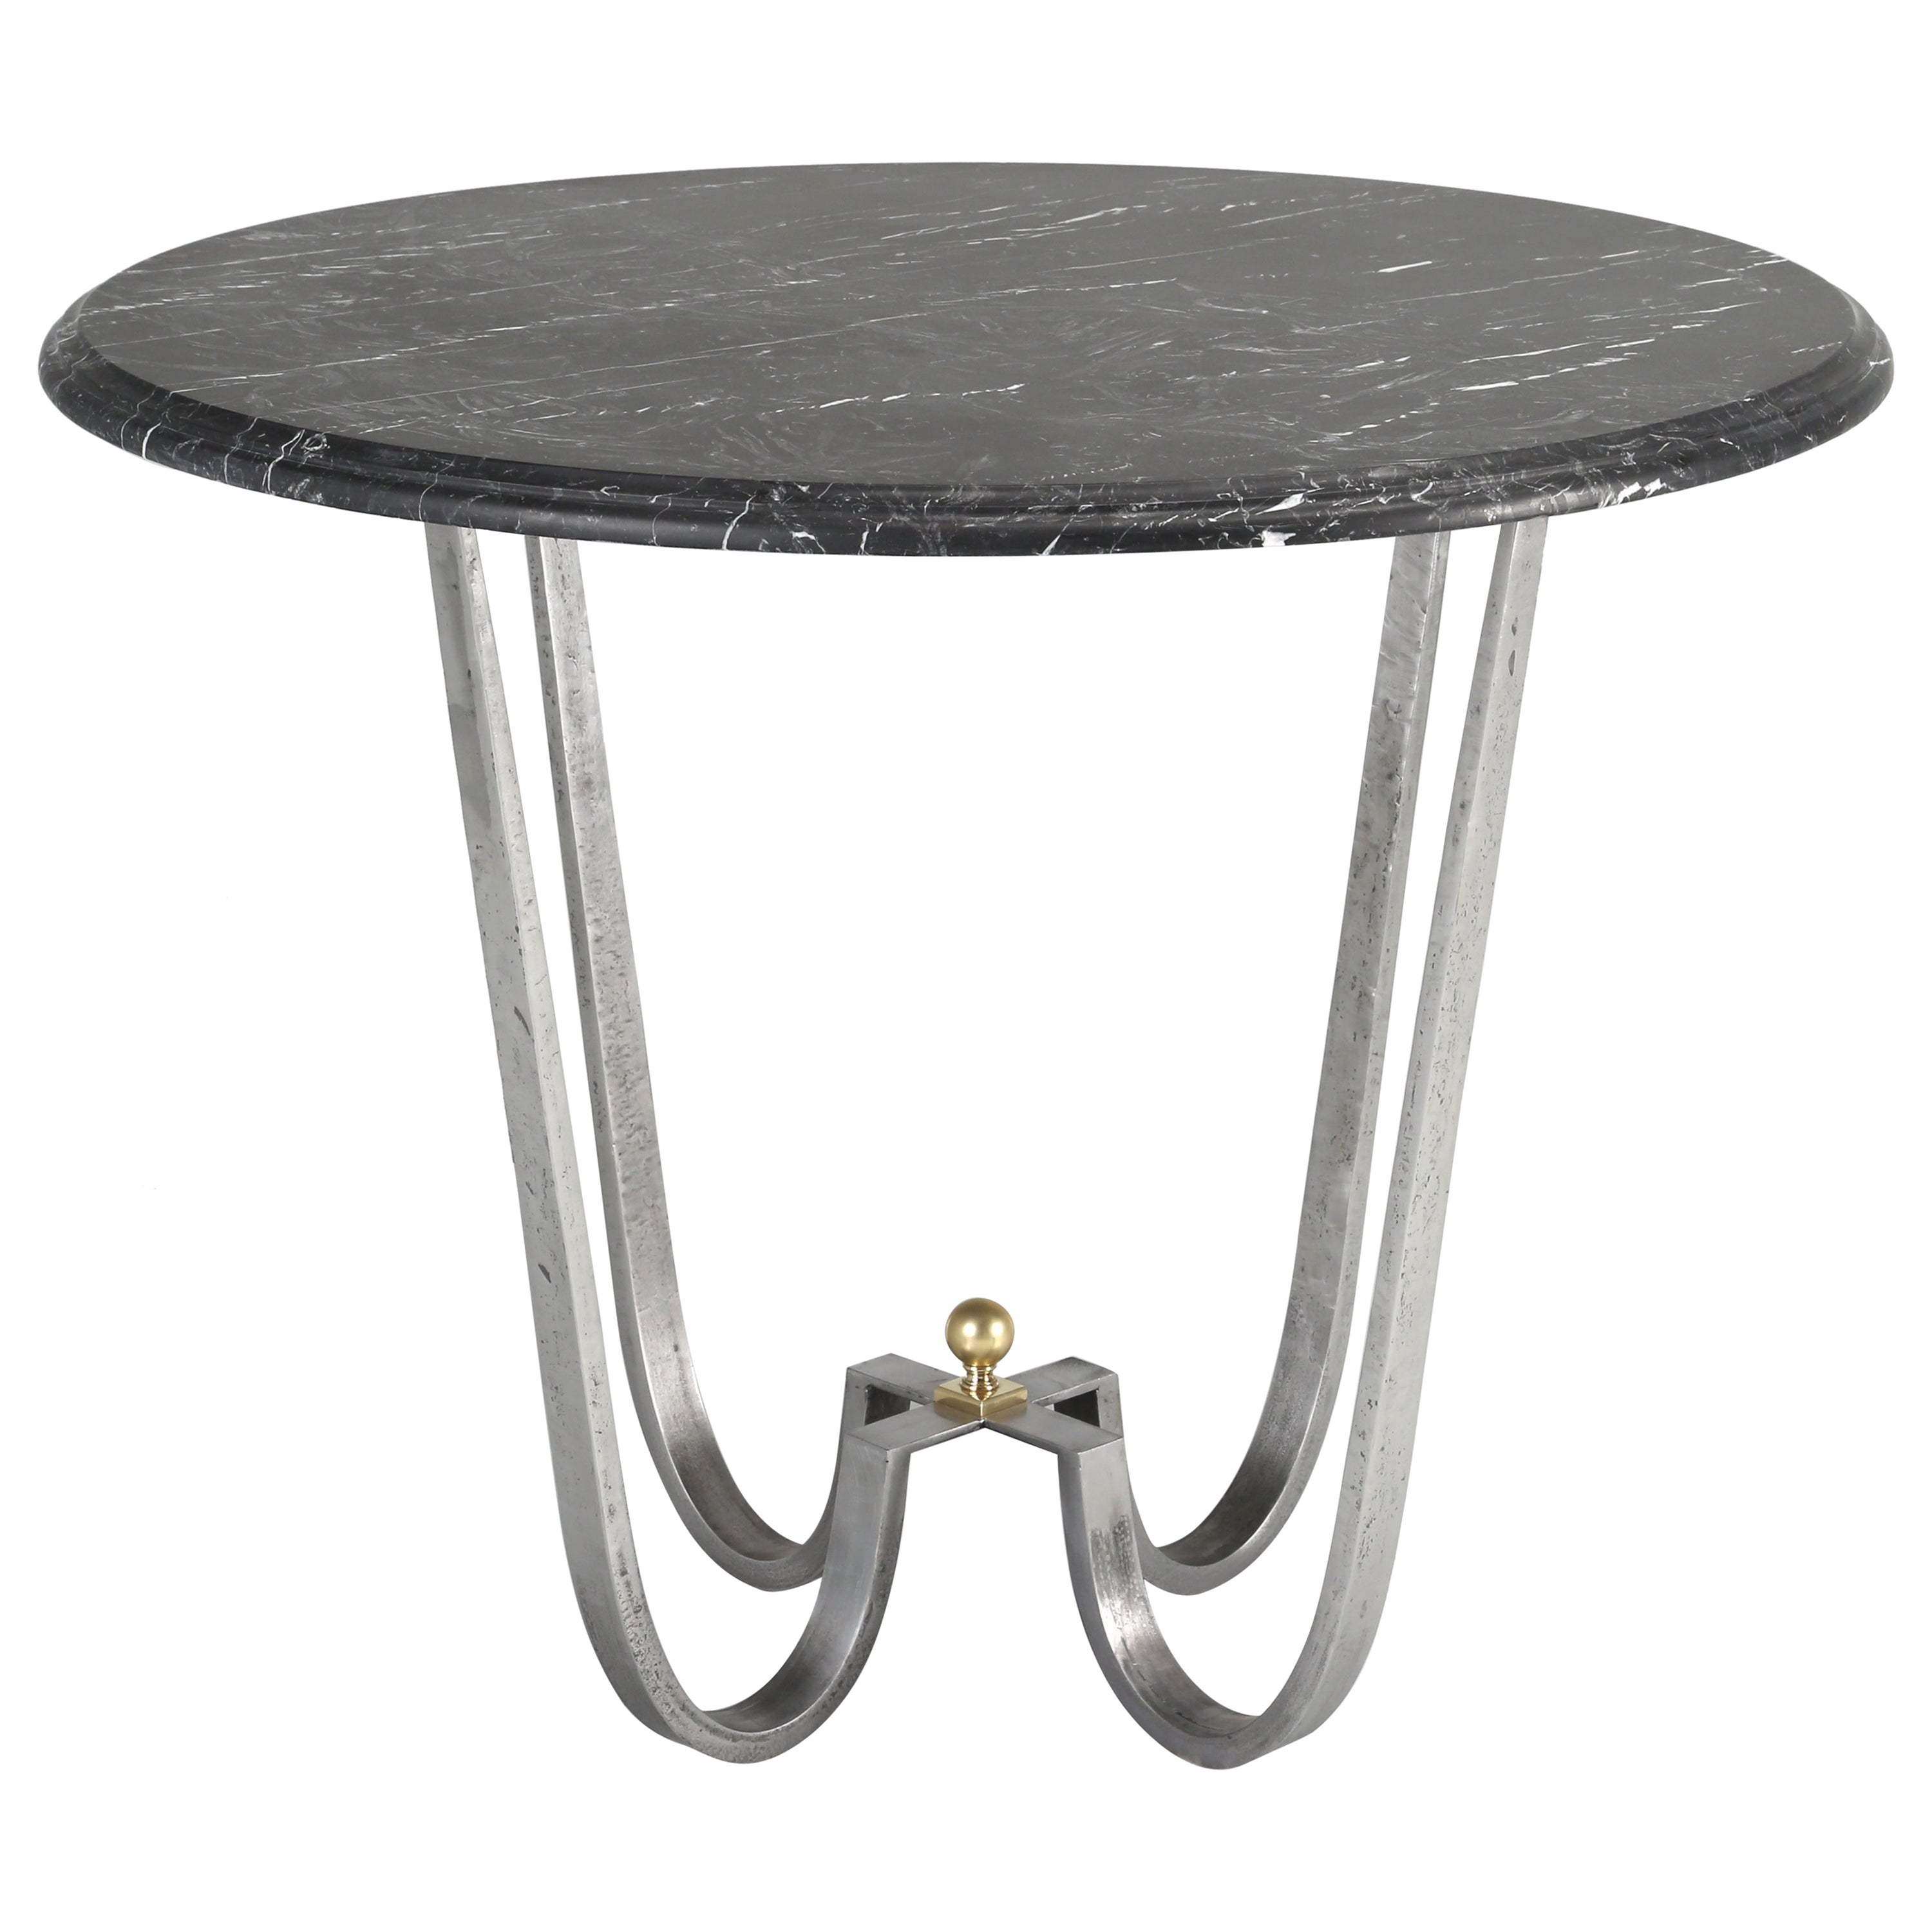 Center Hall Table Mid-Century Modern Burnish Forged Steel Nero Marquina Any Size